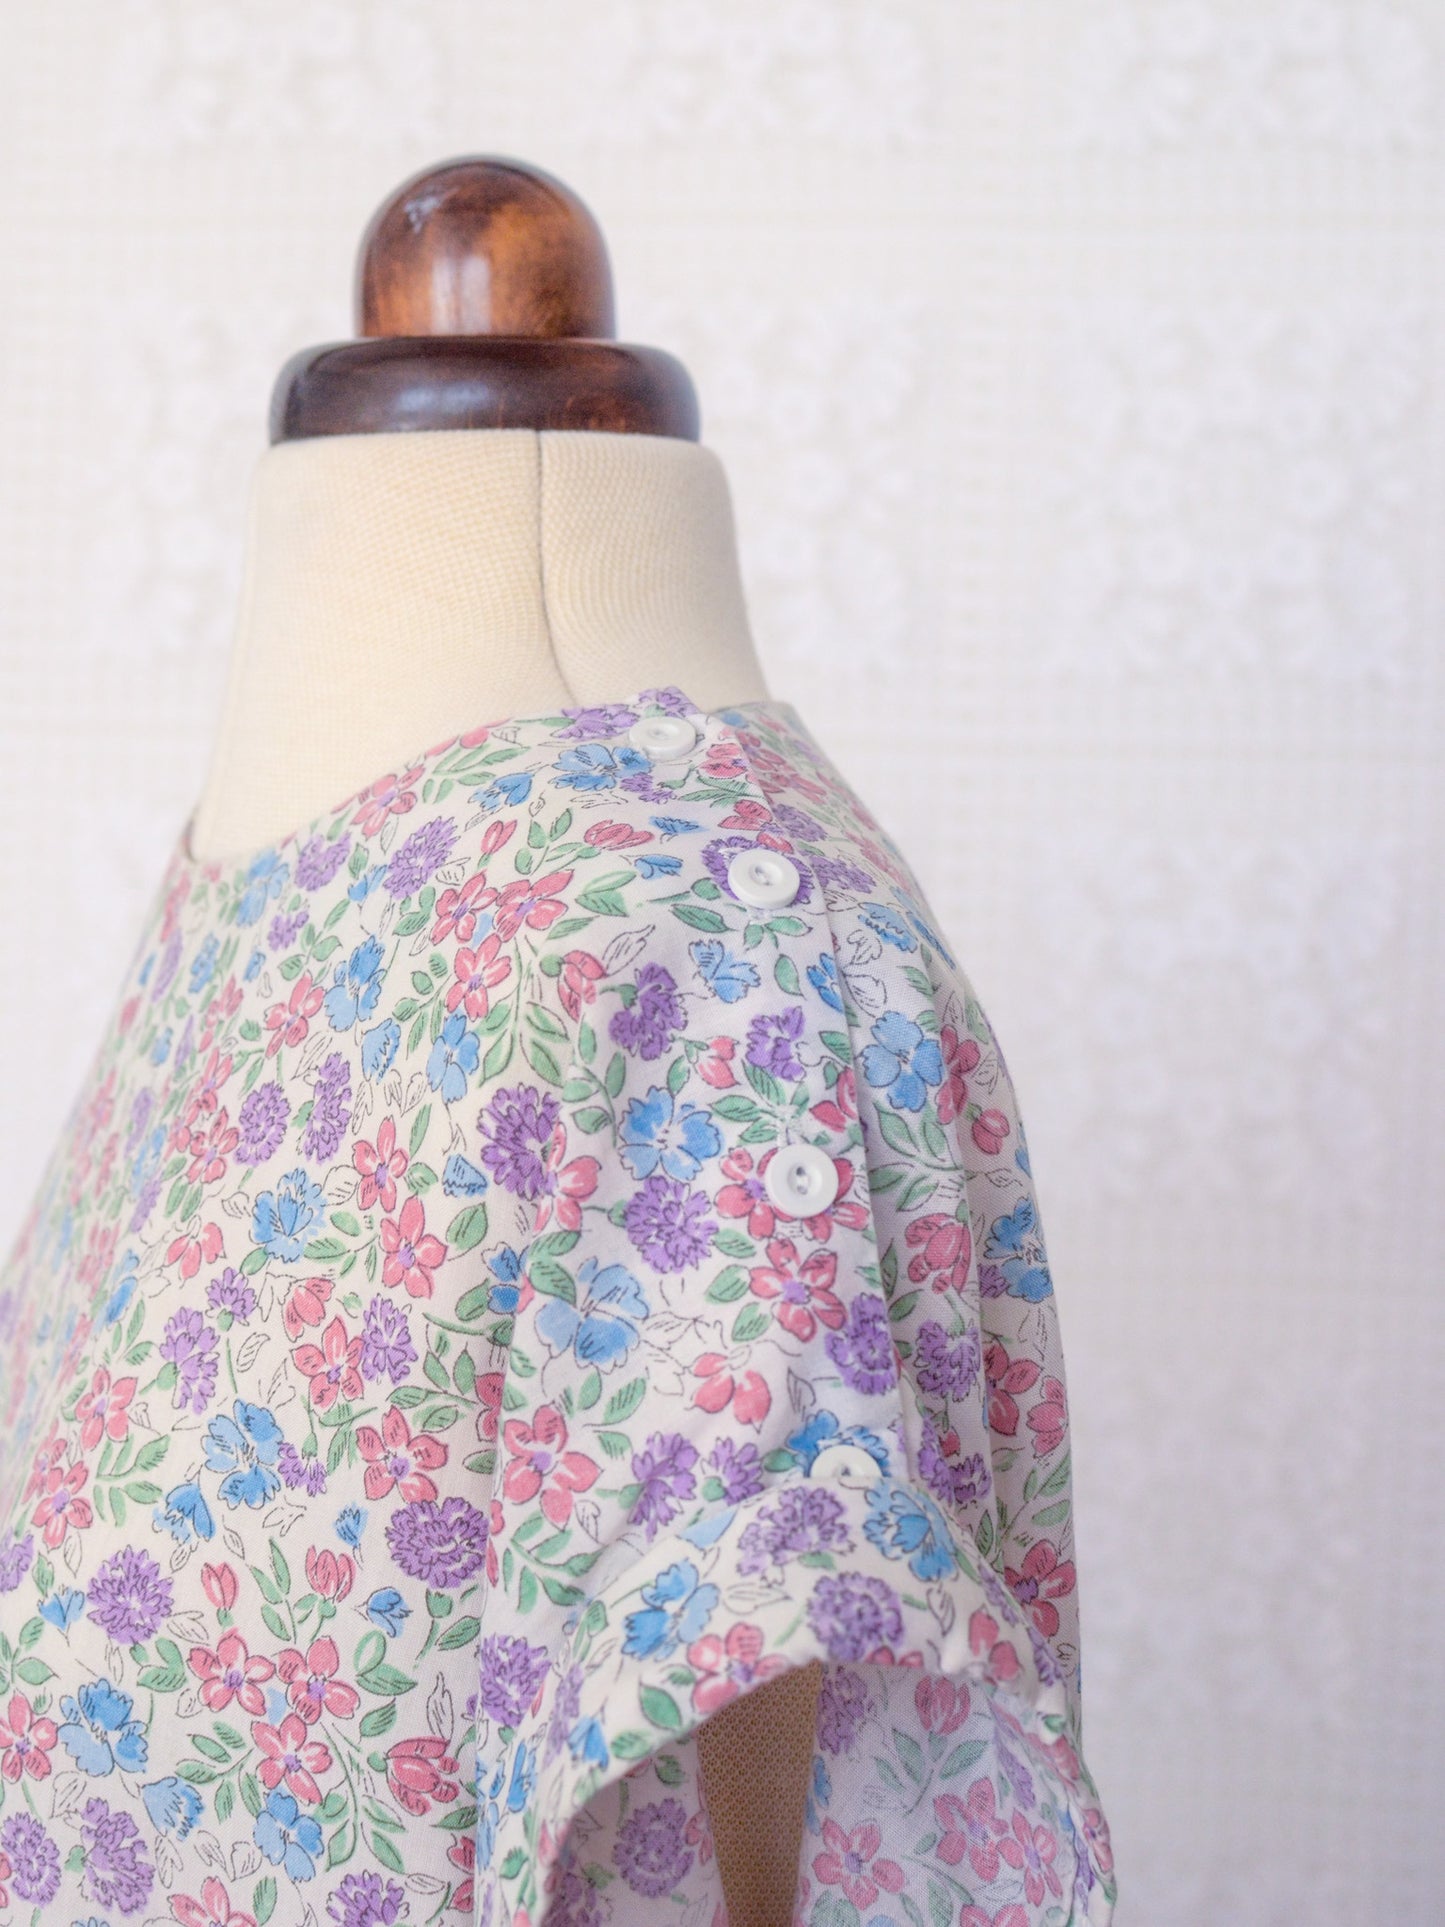 1980s C&A white, pink and blue floral smock dress